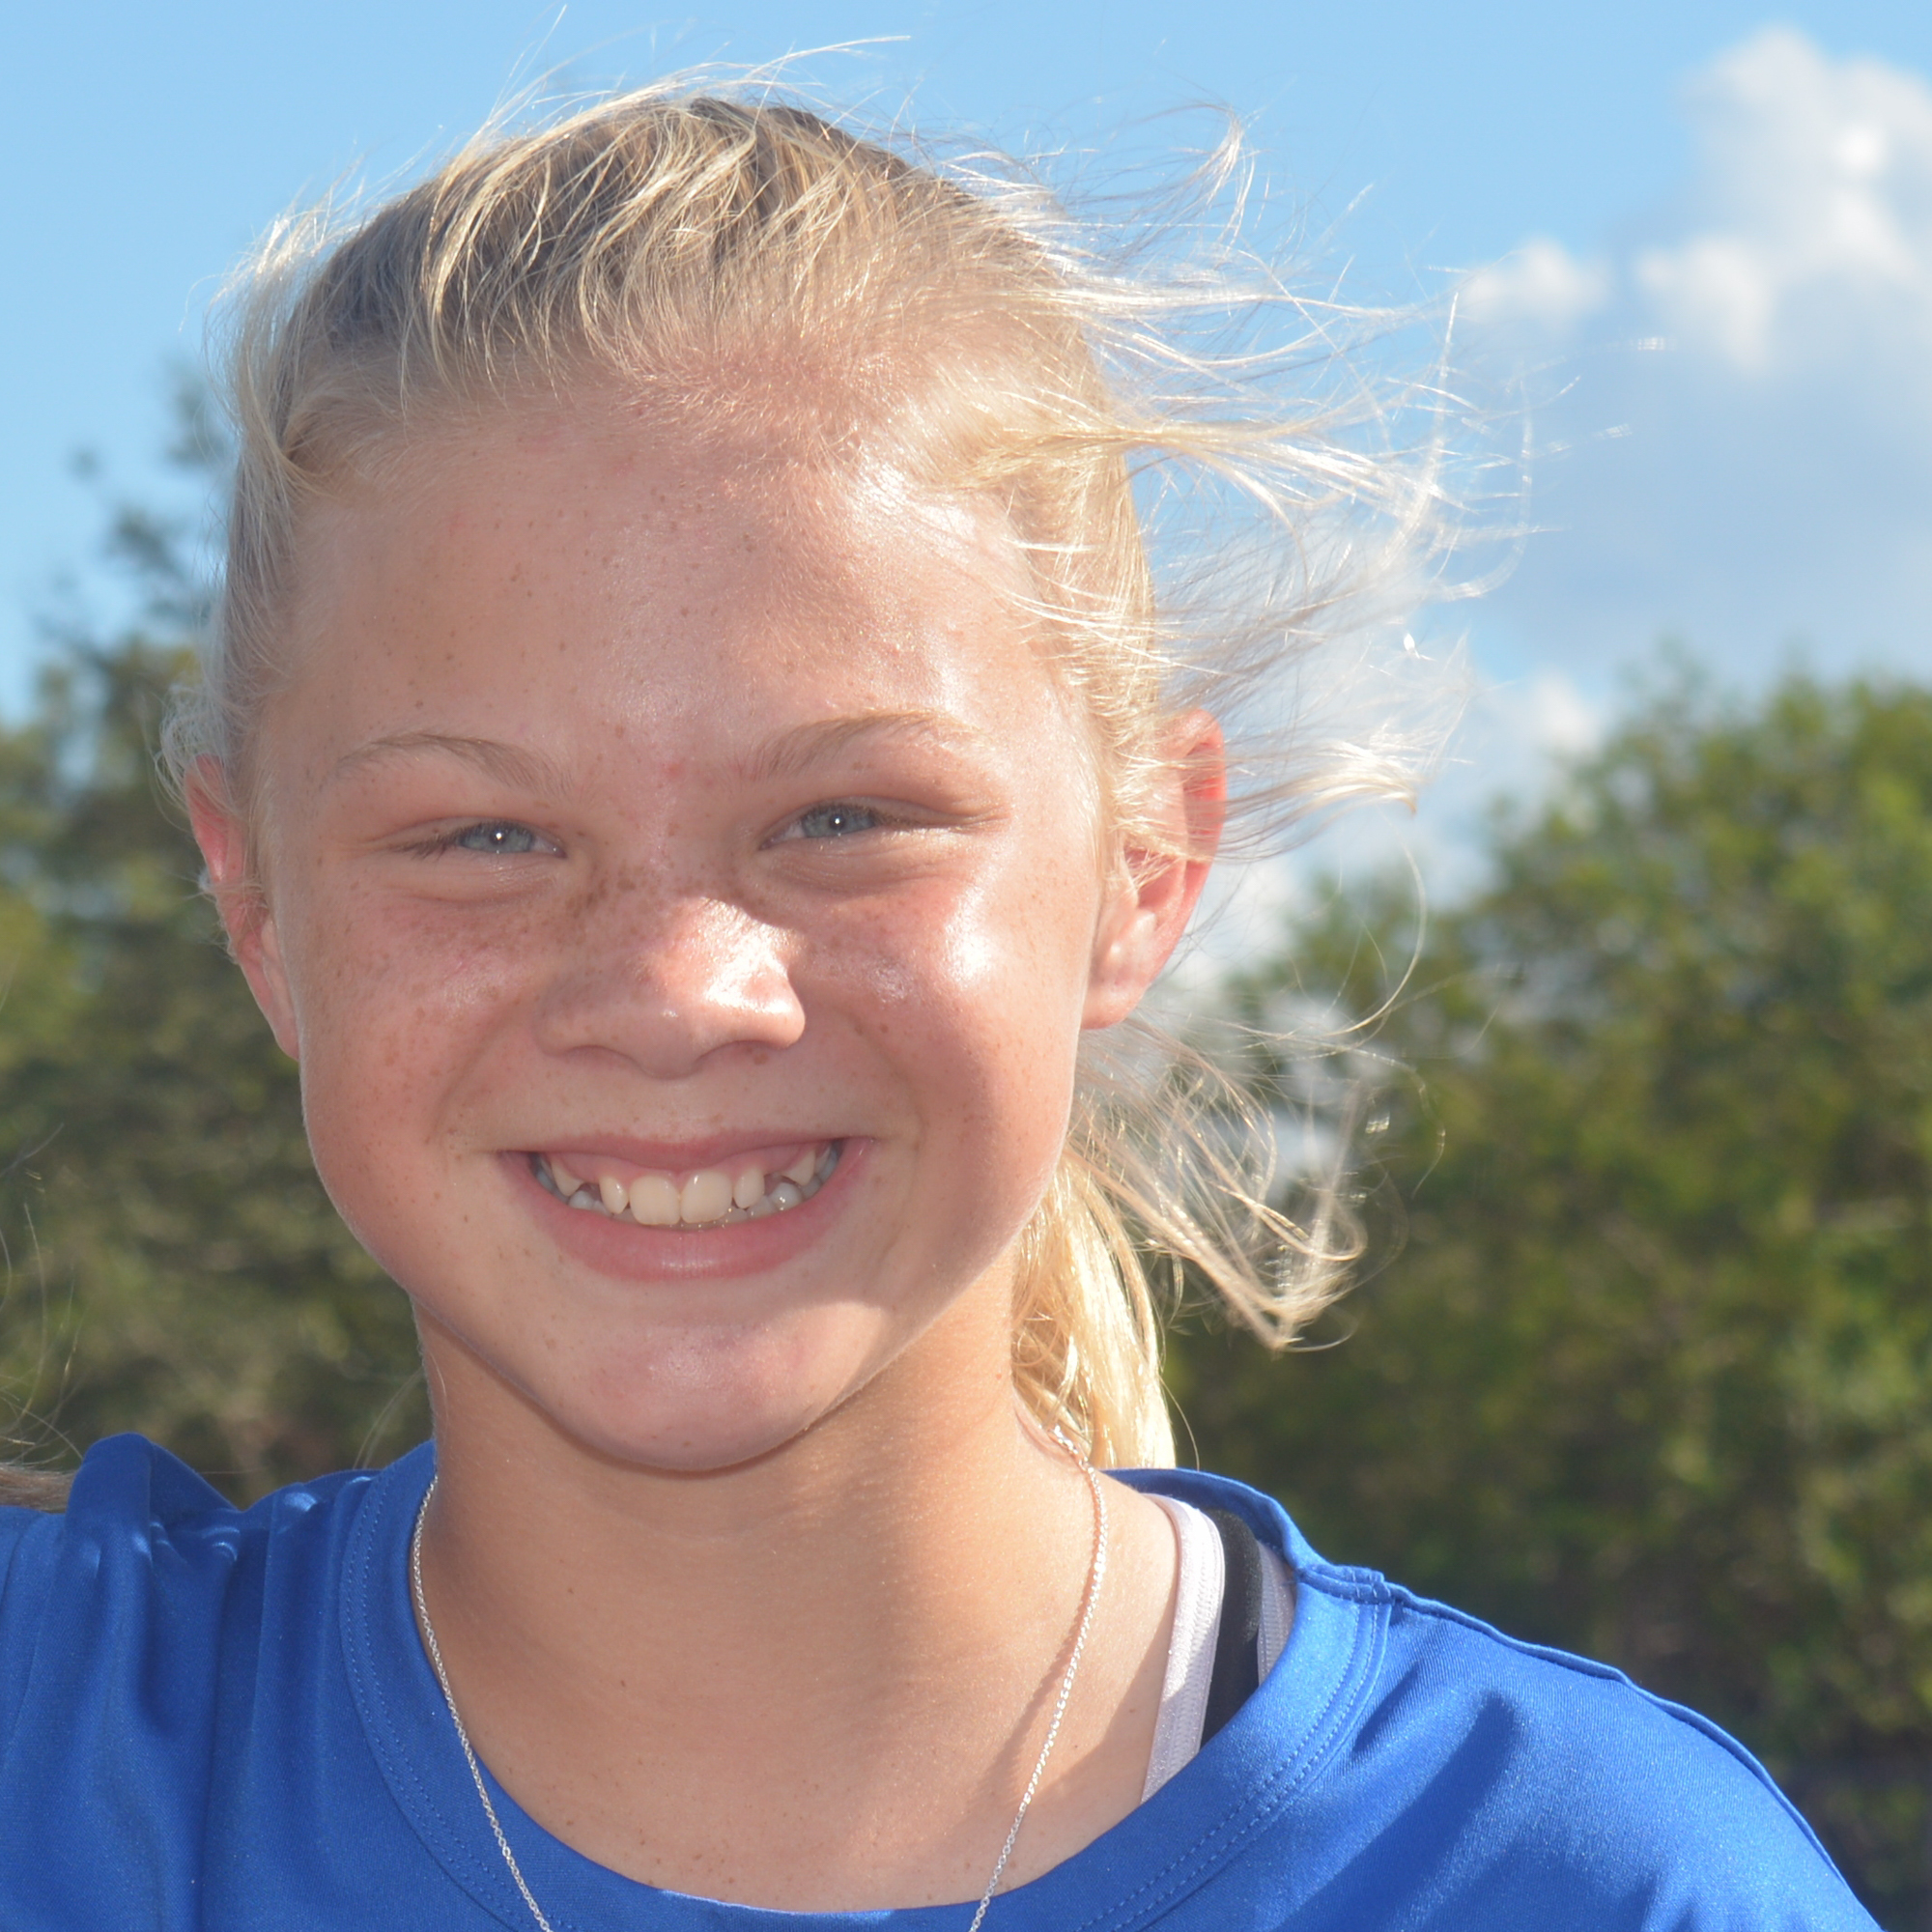 7. Abbey Burwood is the next leader of the ODA girls soccer team.